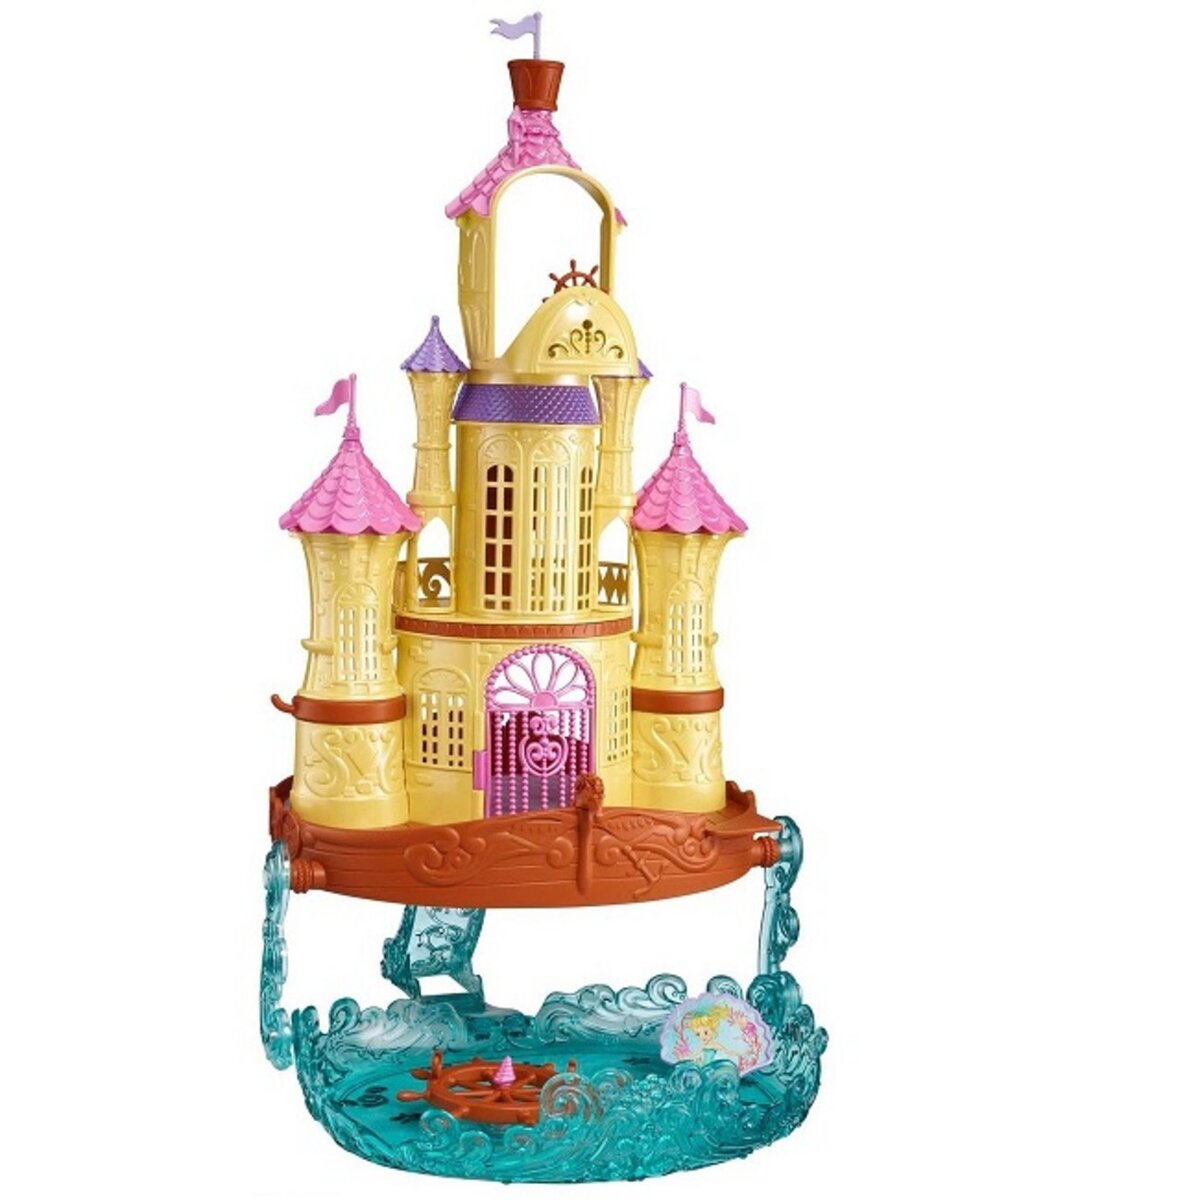 Playset chateau des mers